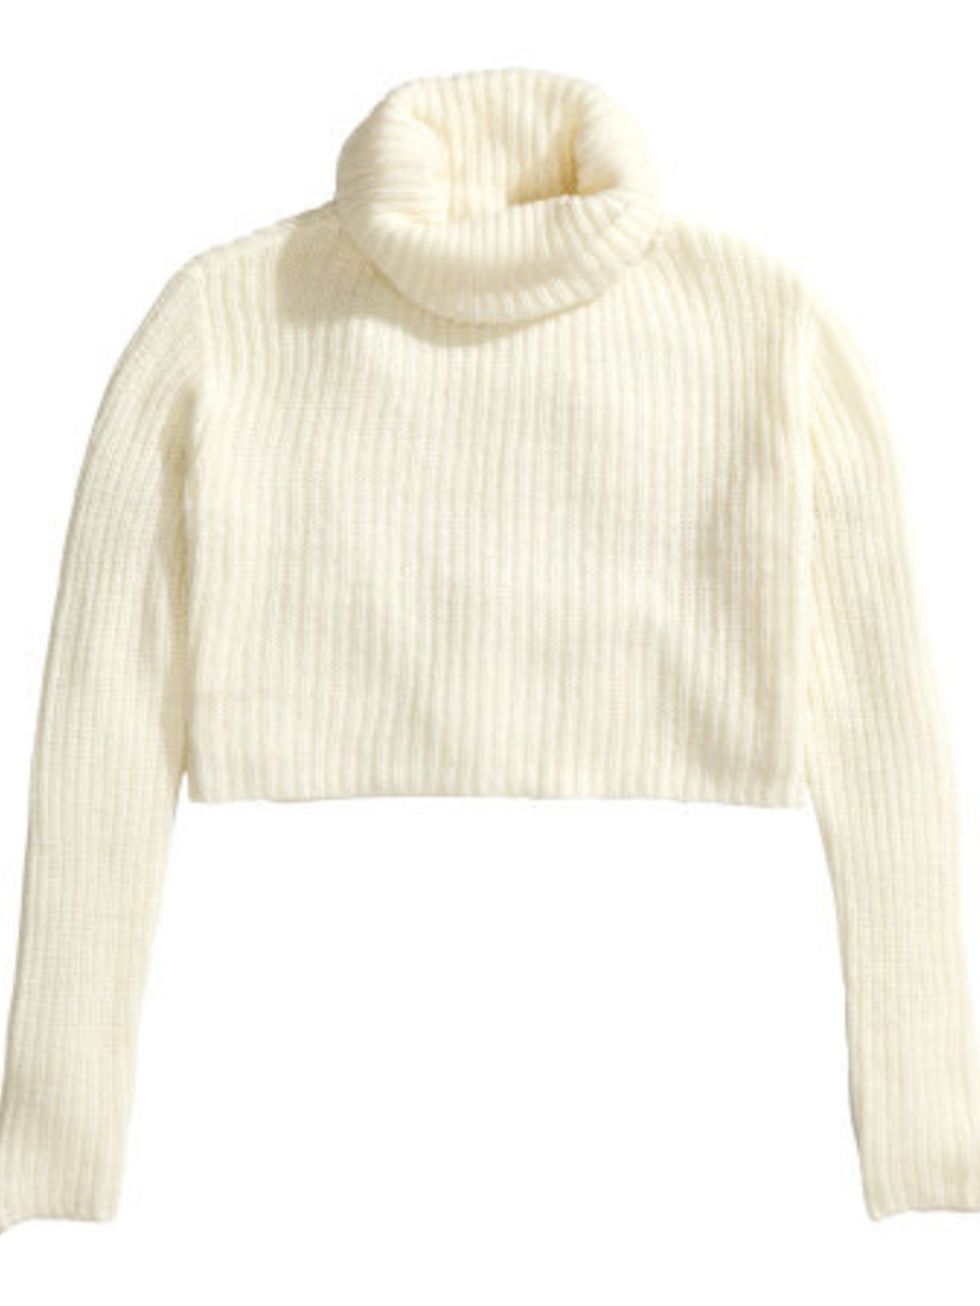 <p>Polo-neck jumper from <a href="http://www.hm.com/gb/product/44753?article=44753-A&fromSearch=polo&cm_vc=SEARCH">H&M,</a> £14.99.</p>